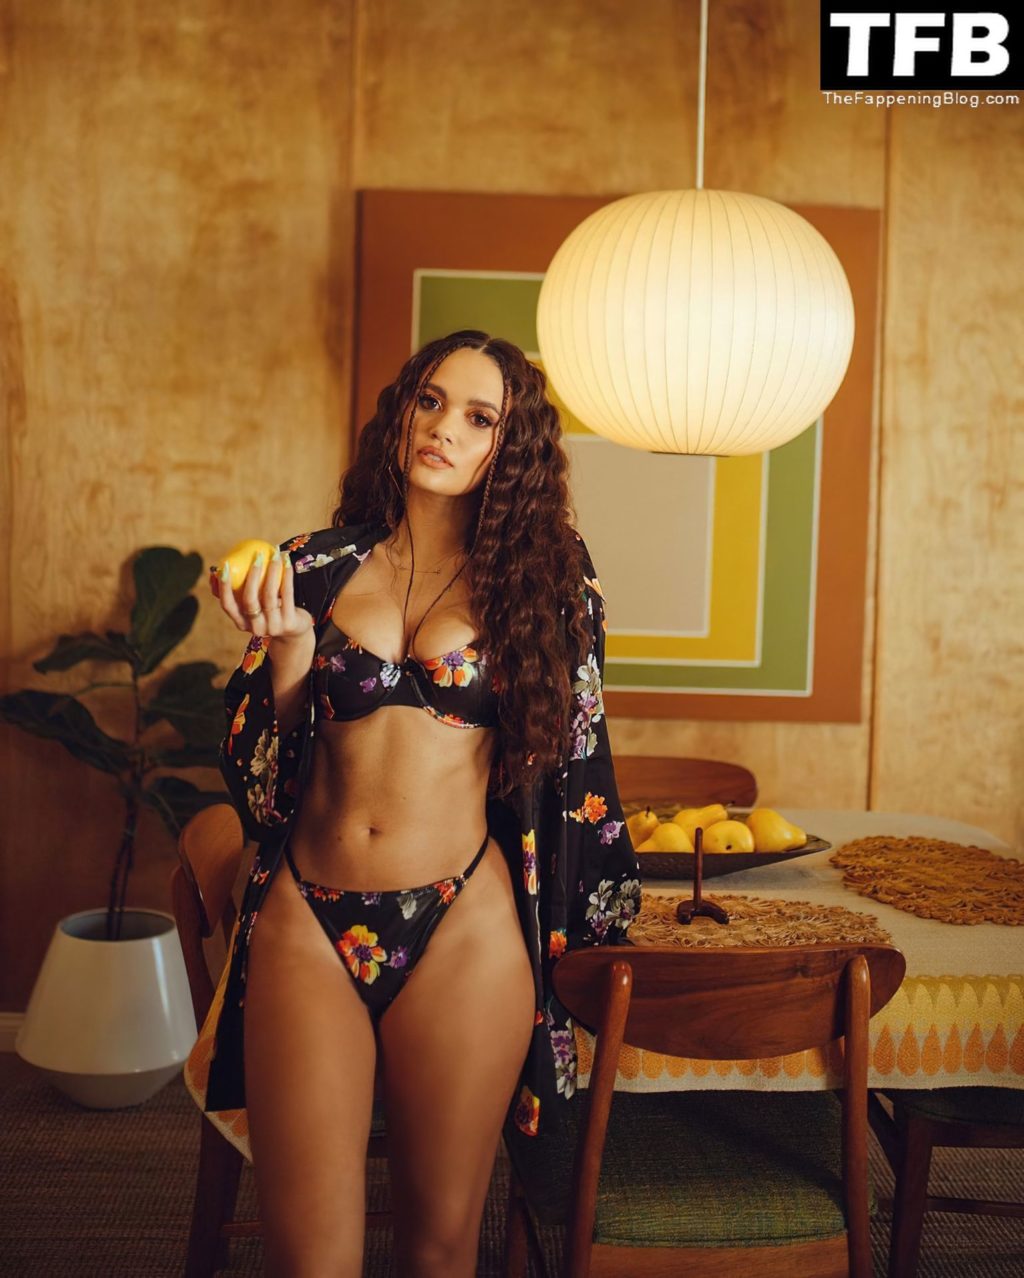 Madison Pettis Sexy Boobs in Lingerie 1 1 thefappeningblog.com  1024x1278 - Madison Pettis Displays Her Gorgeous Body For the Latest Savage x Fenty Campaign (6 Photos)